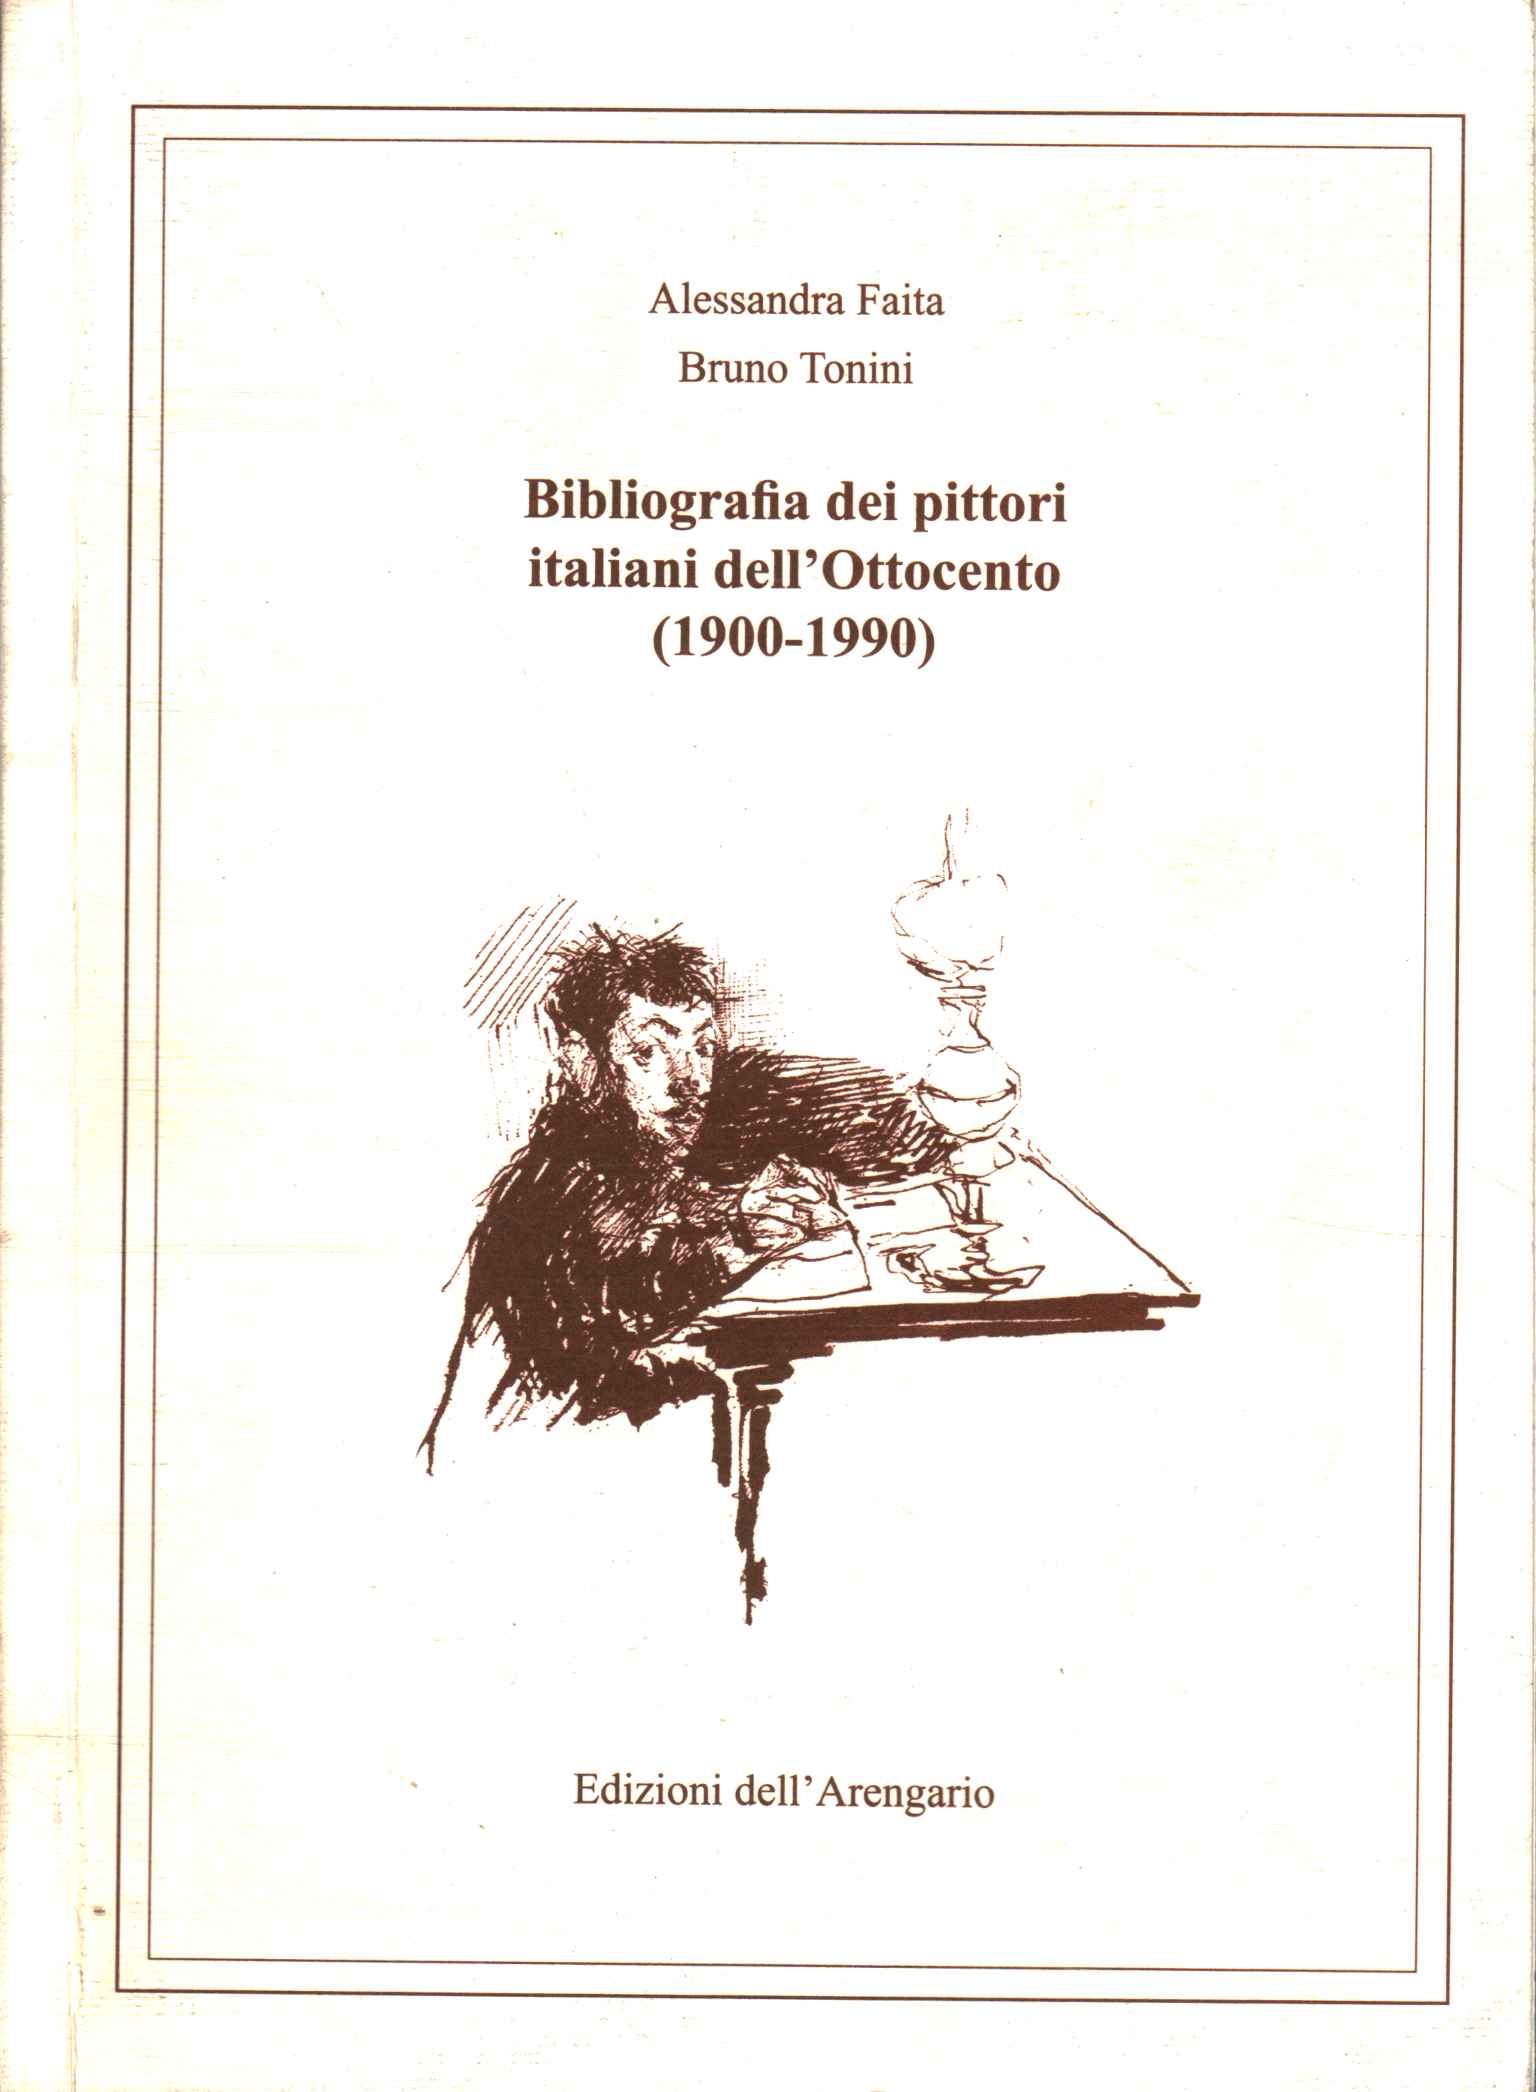 Bibliography of Italian painters of the Apo